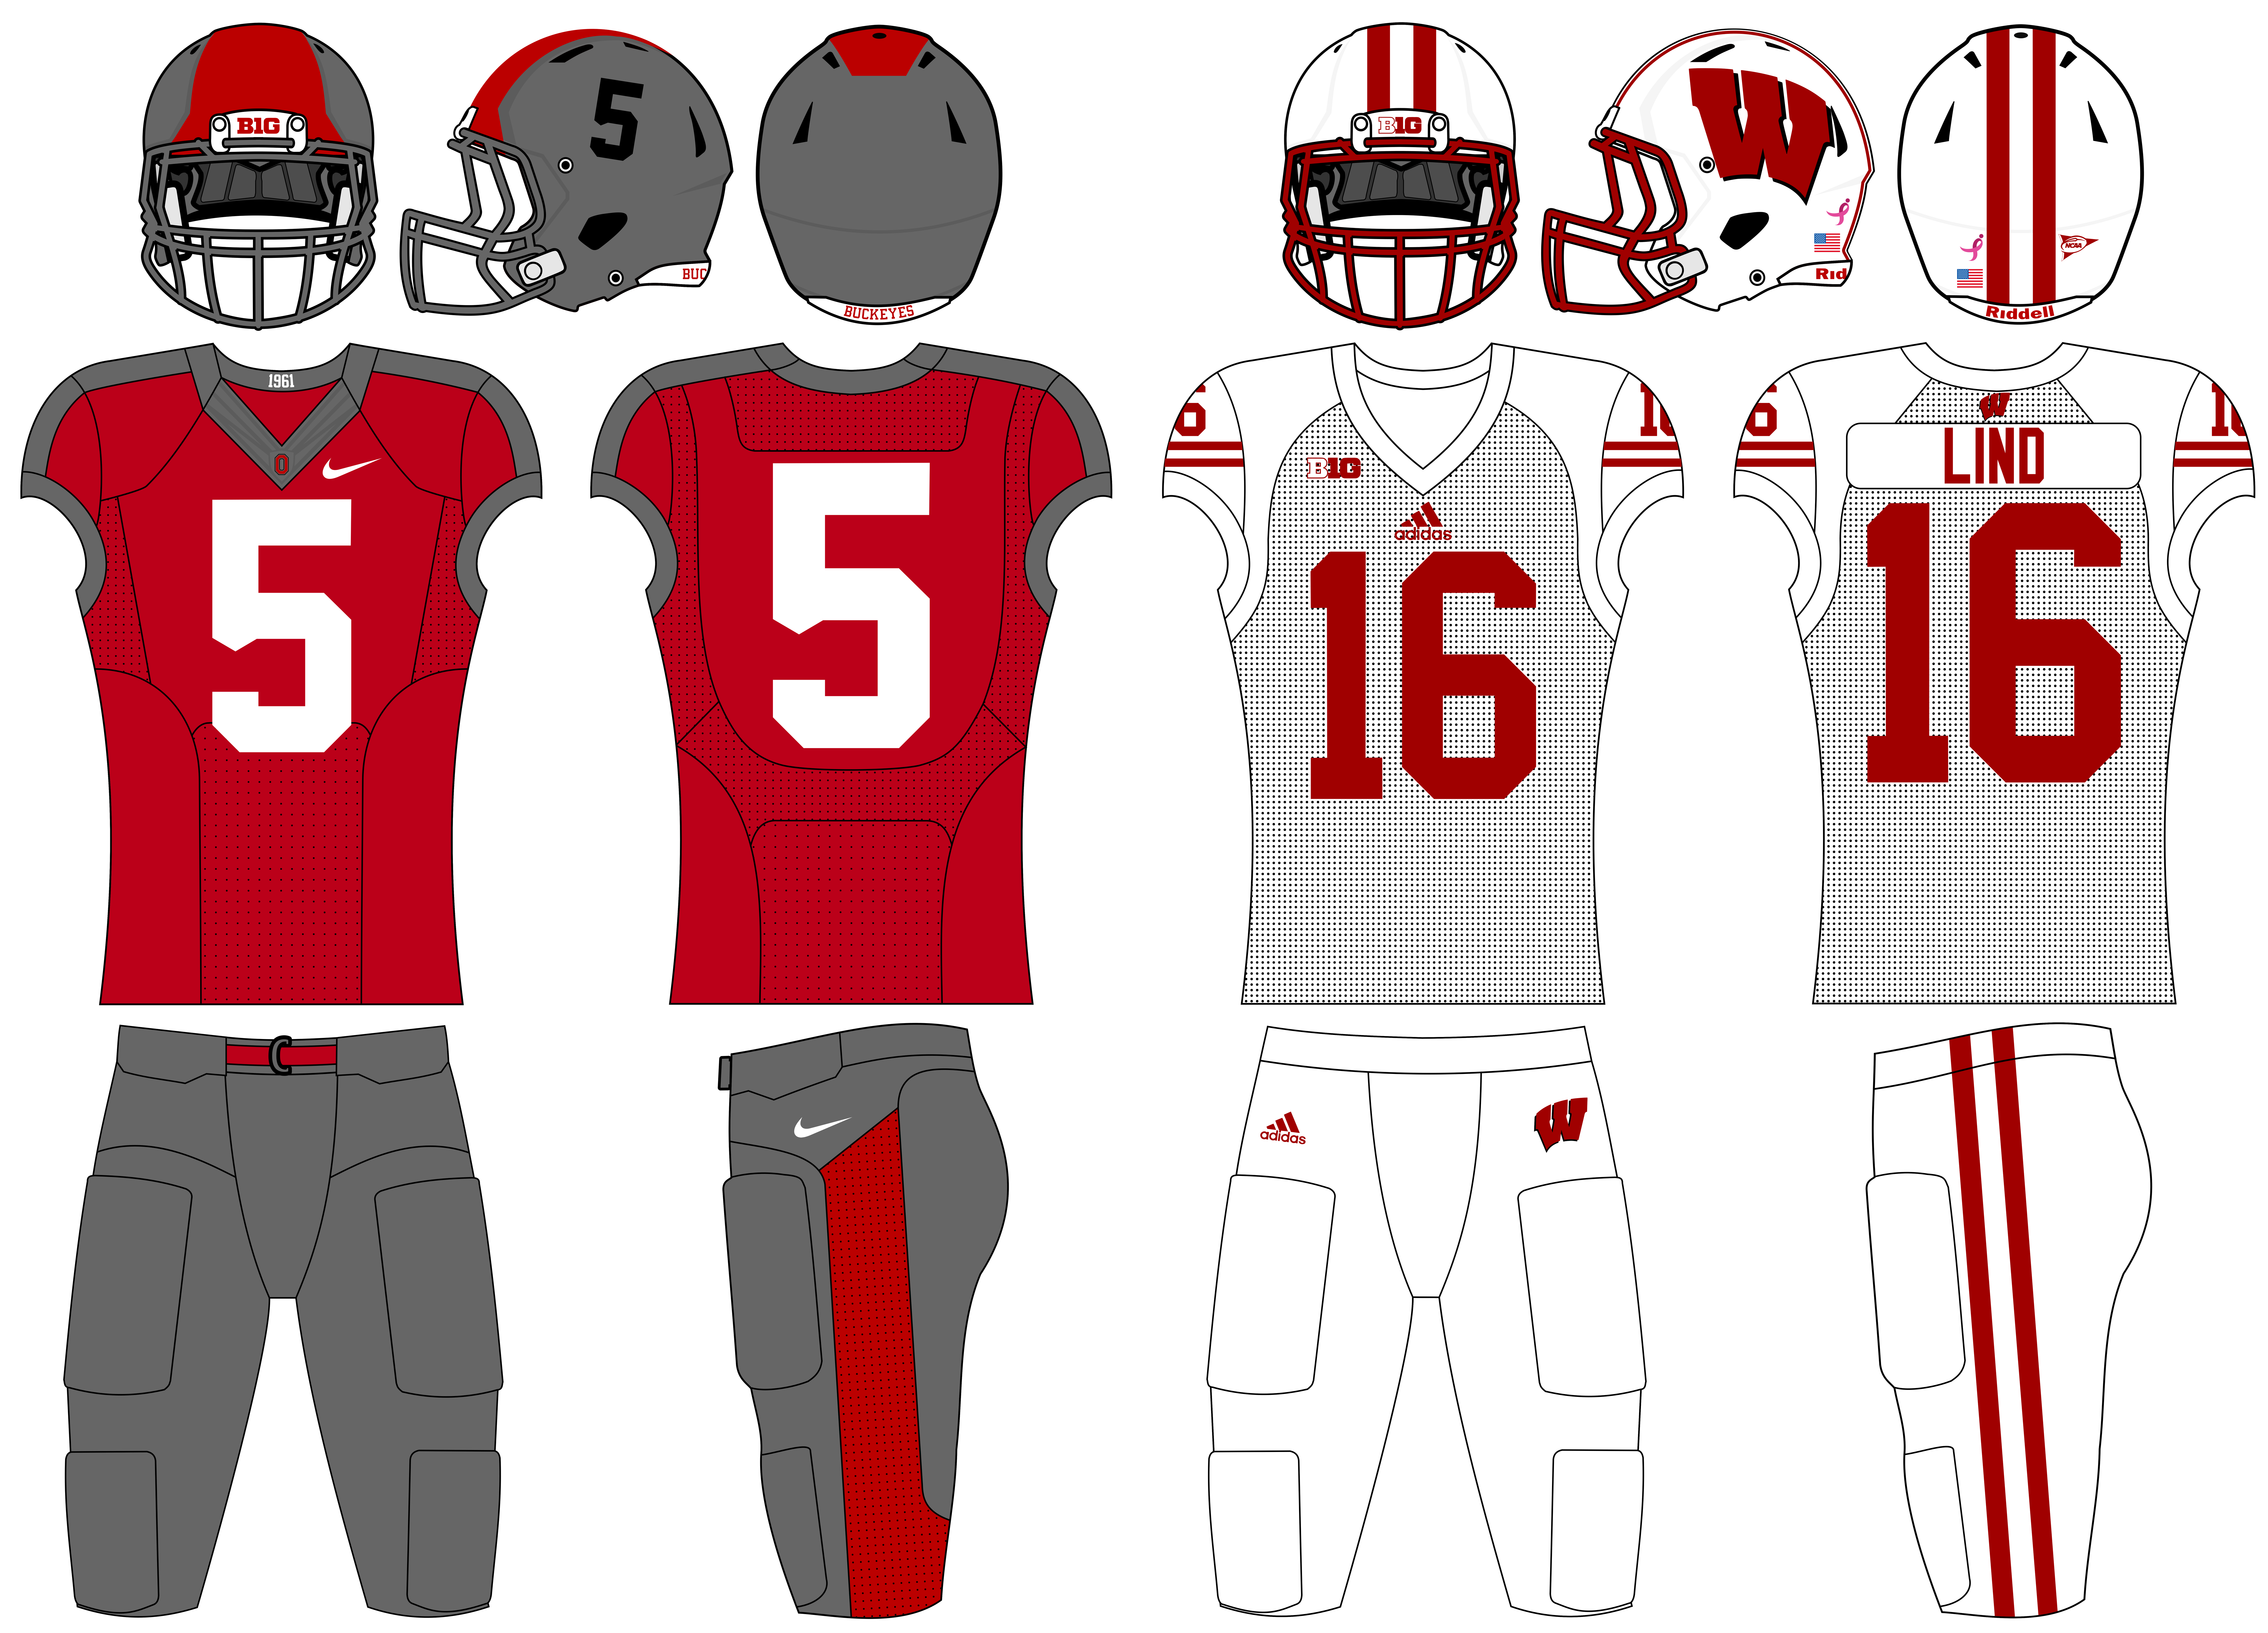 ohio state number 5 jersey